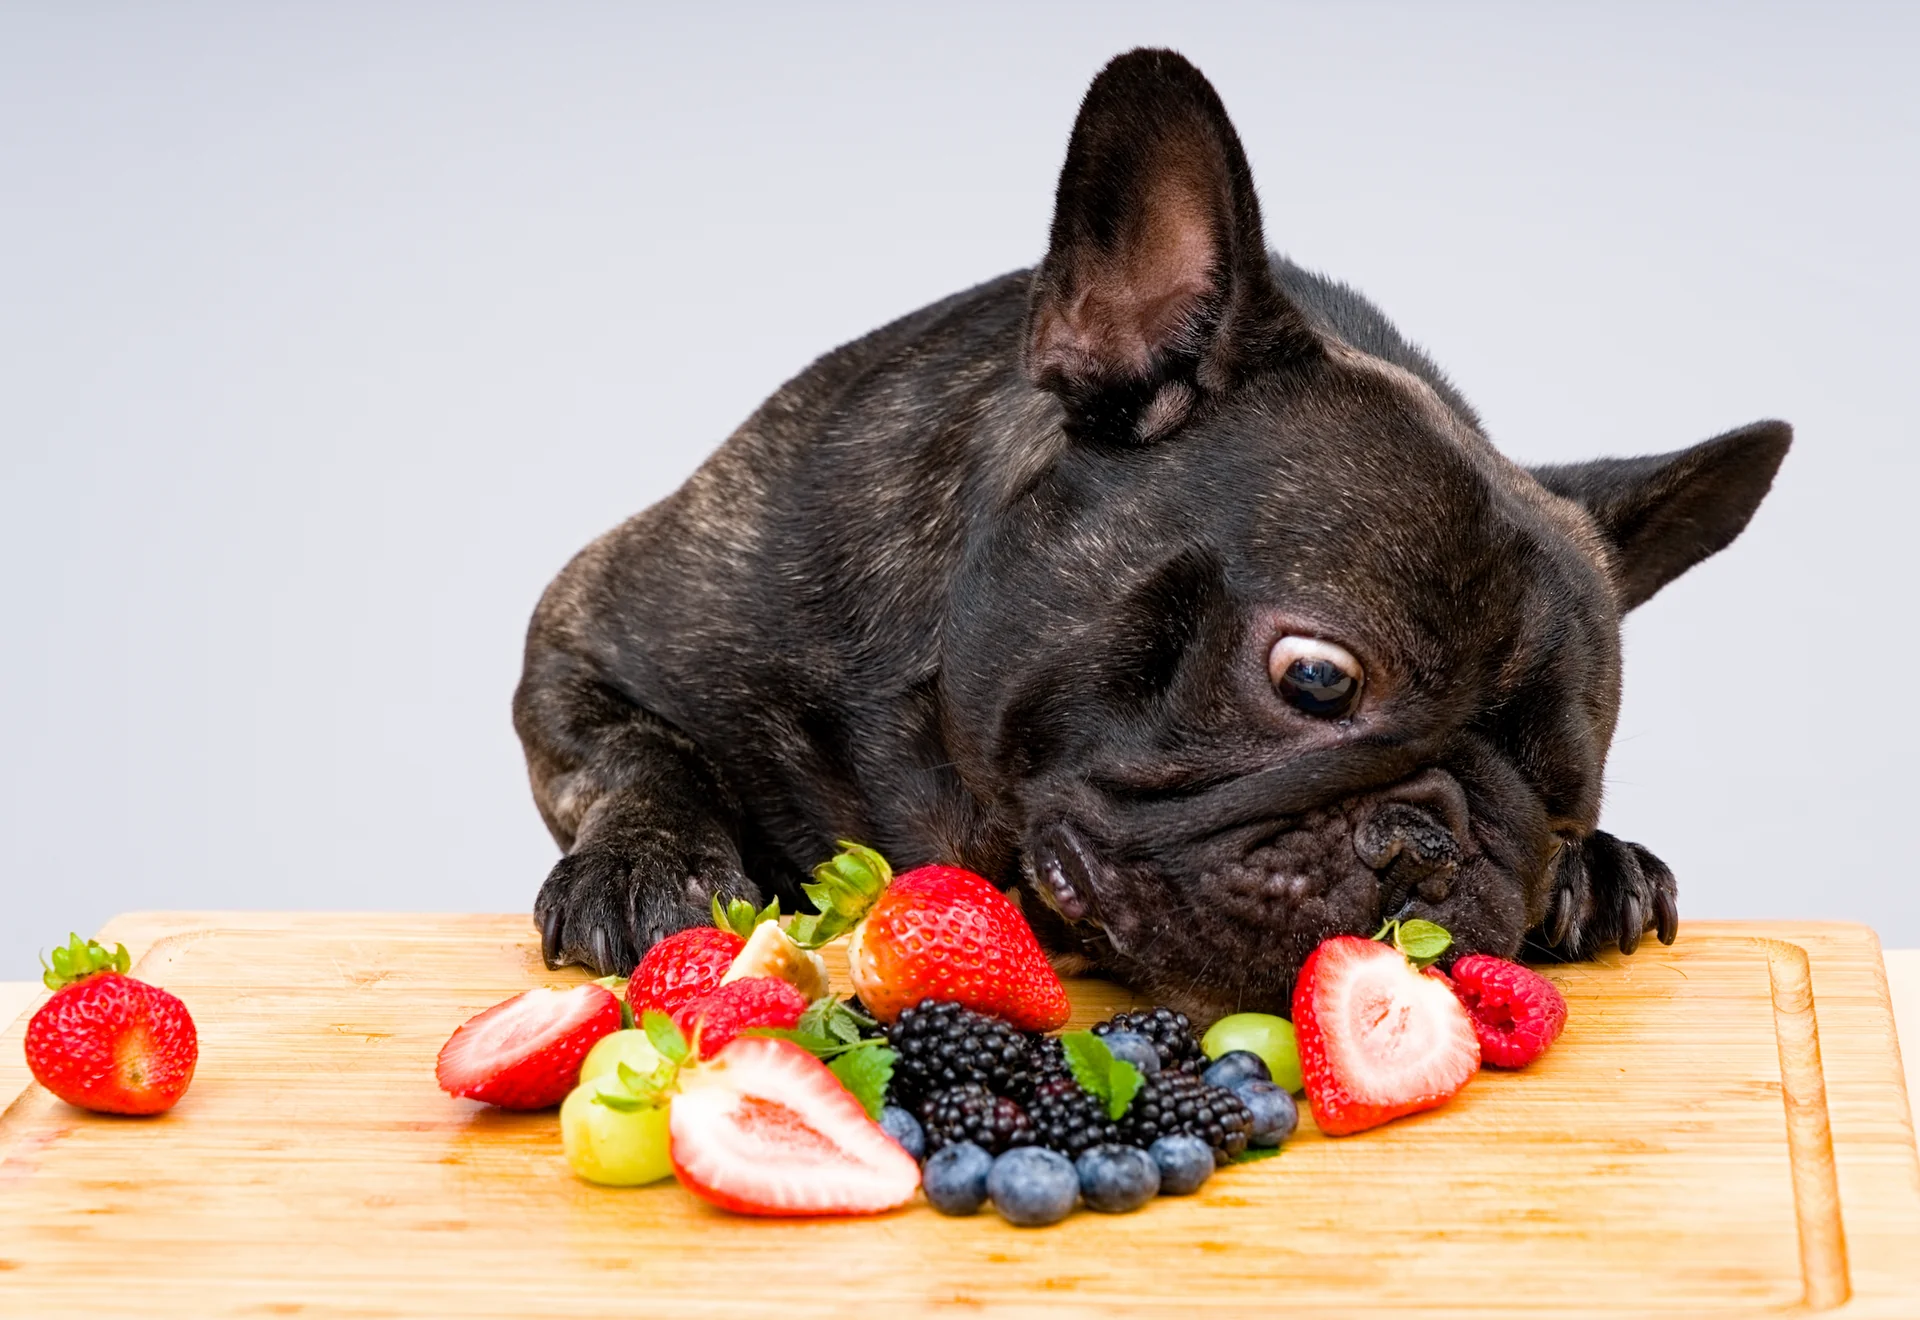 Do you need to add fresh food to your dog’s diet?